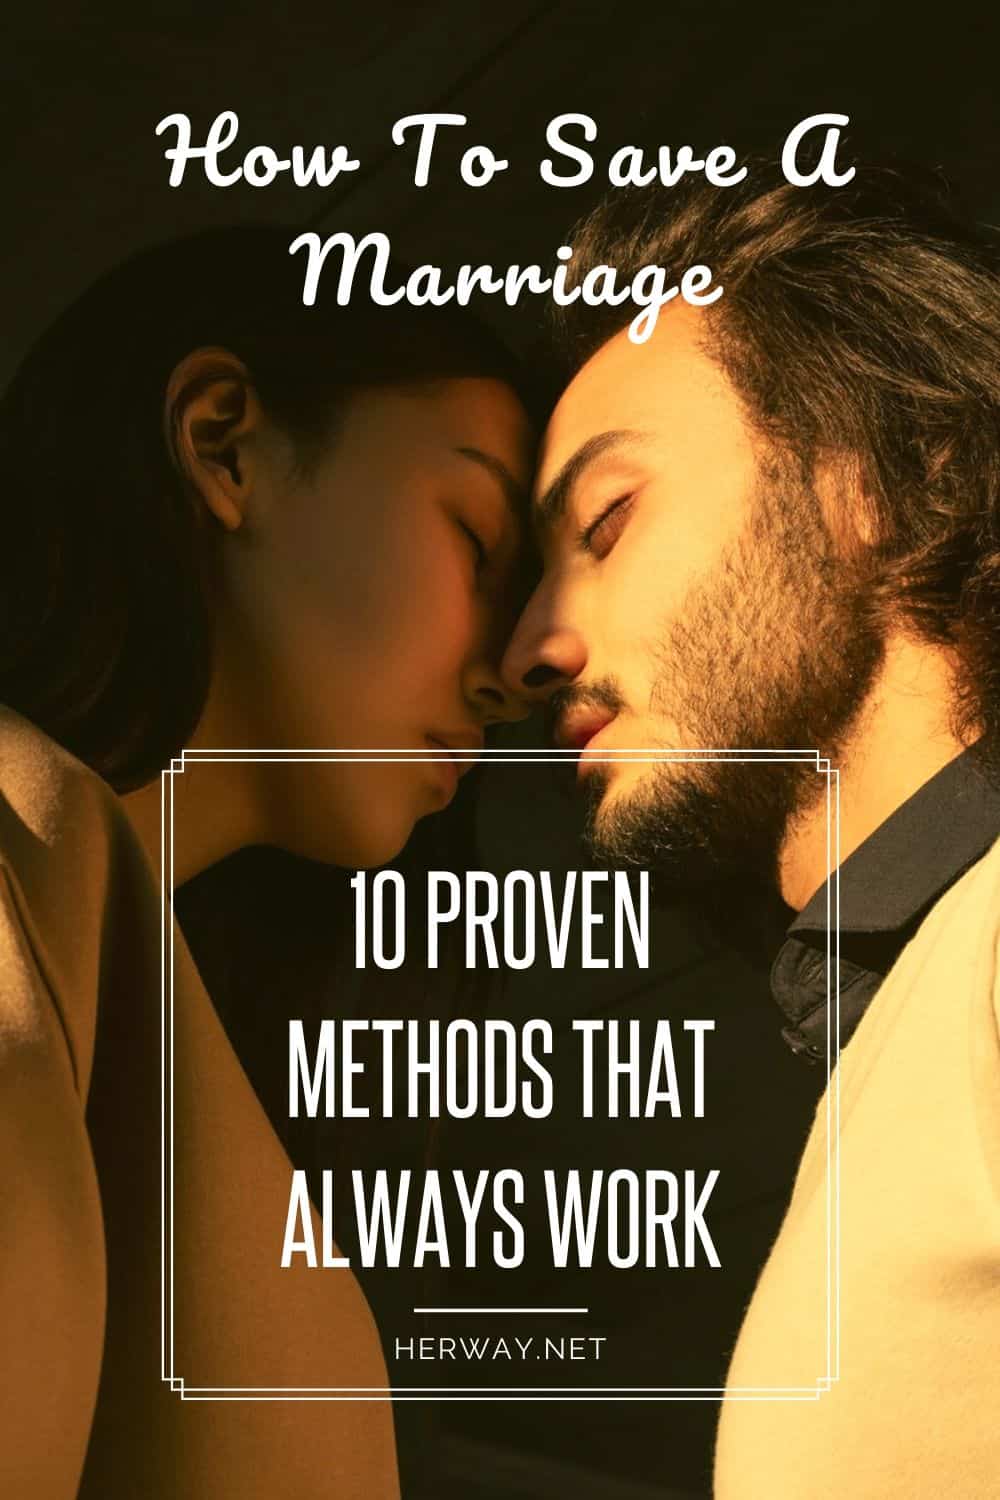 How To Save A Marriage: 10 Proven Methods That Always Work